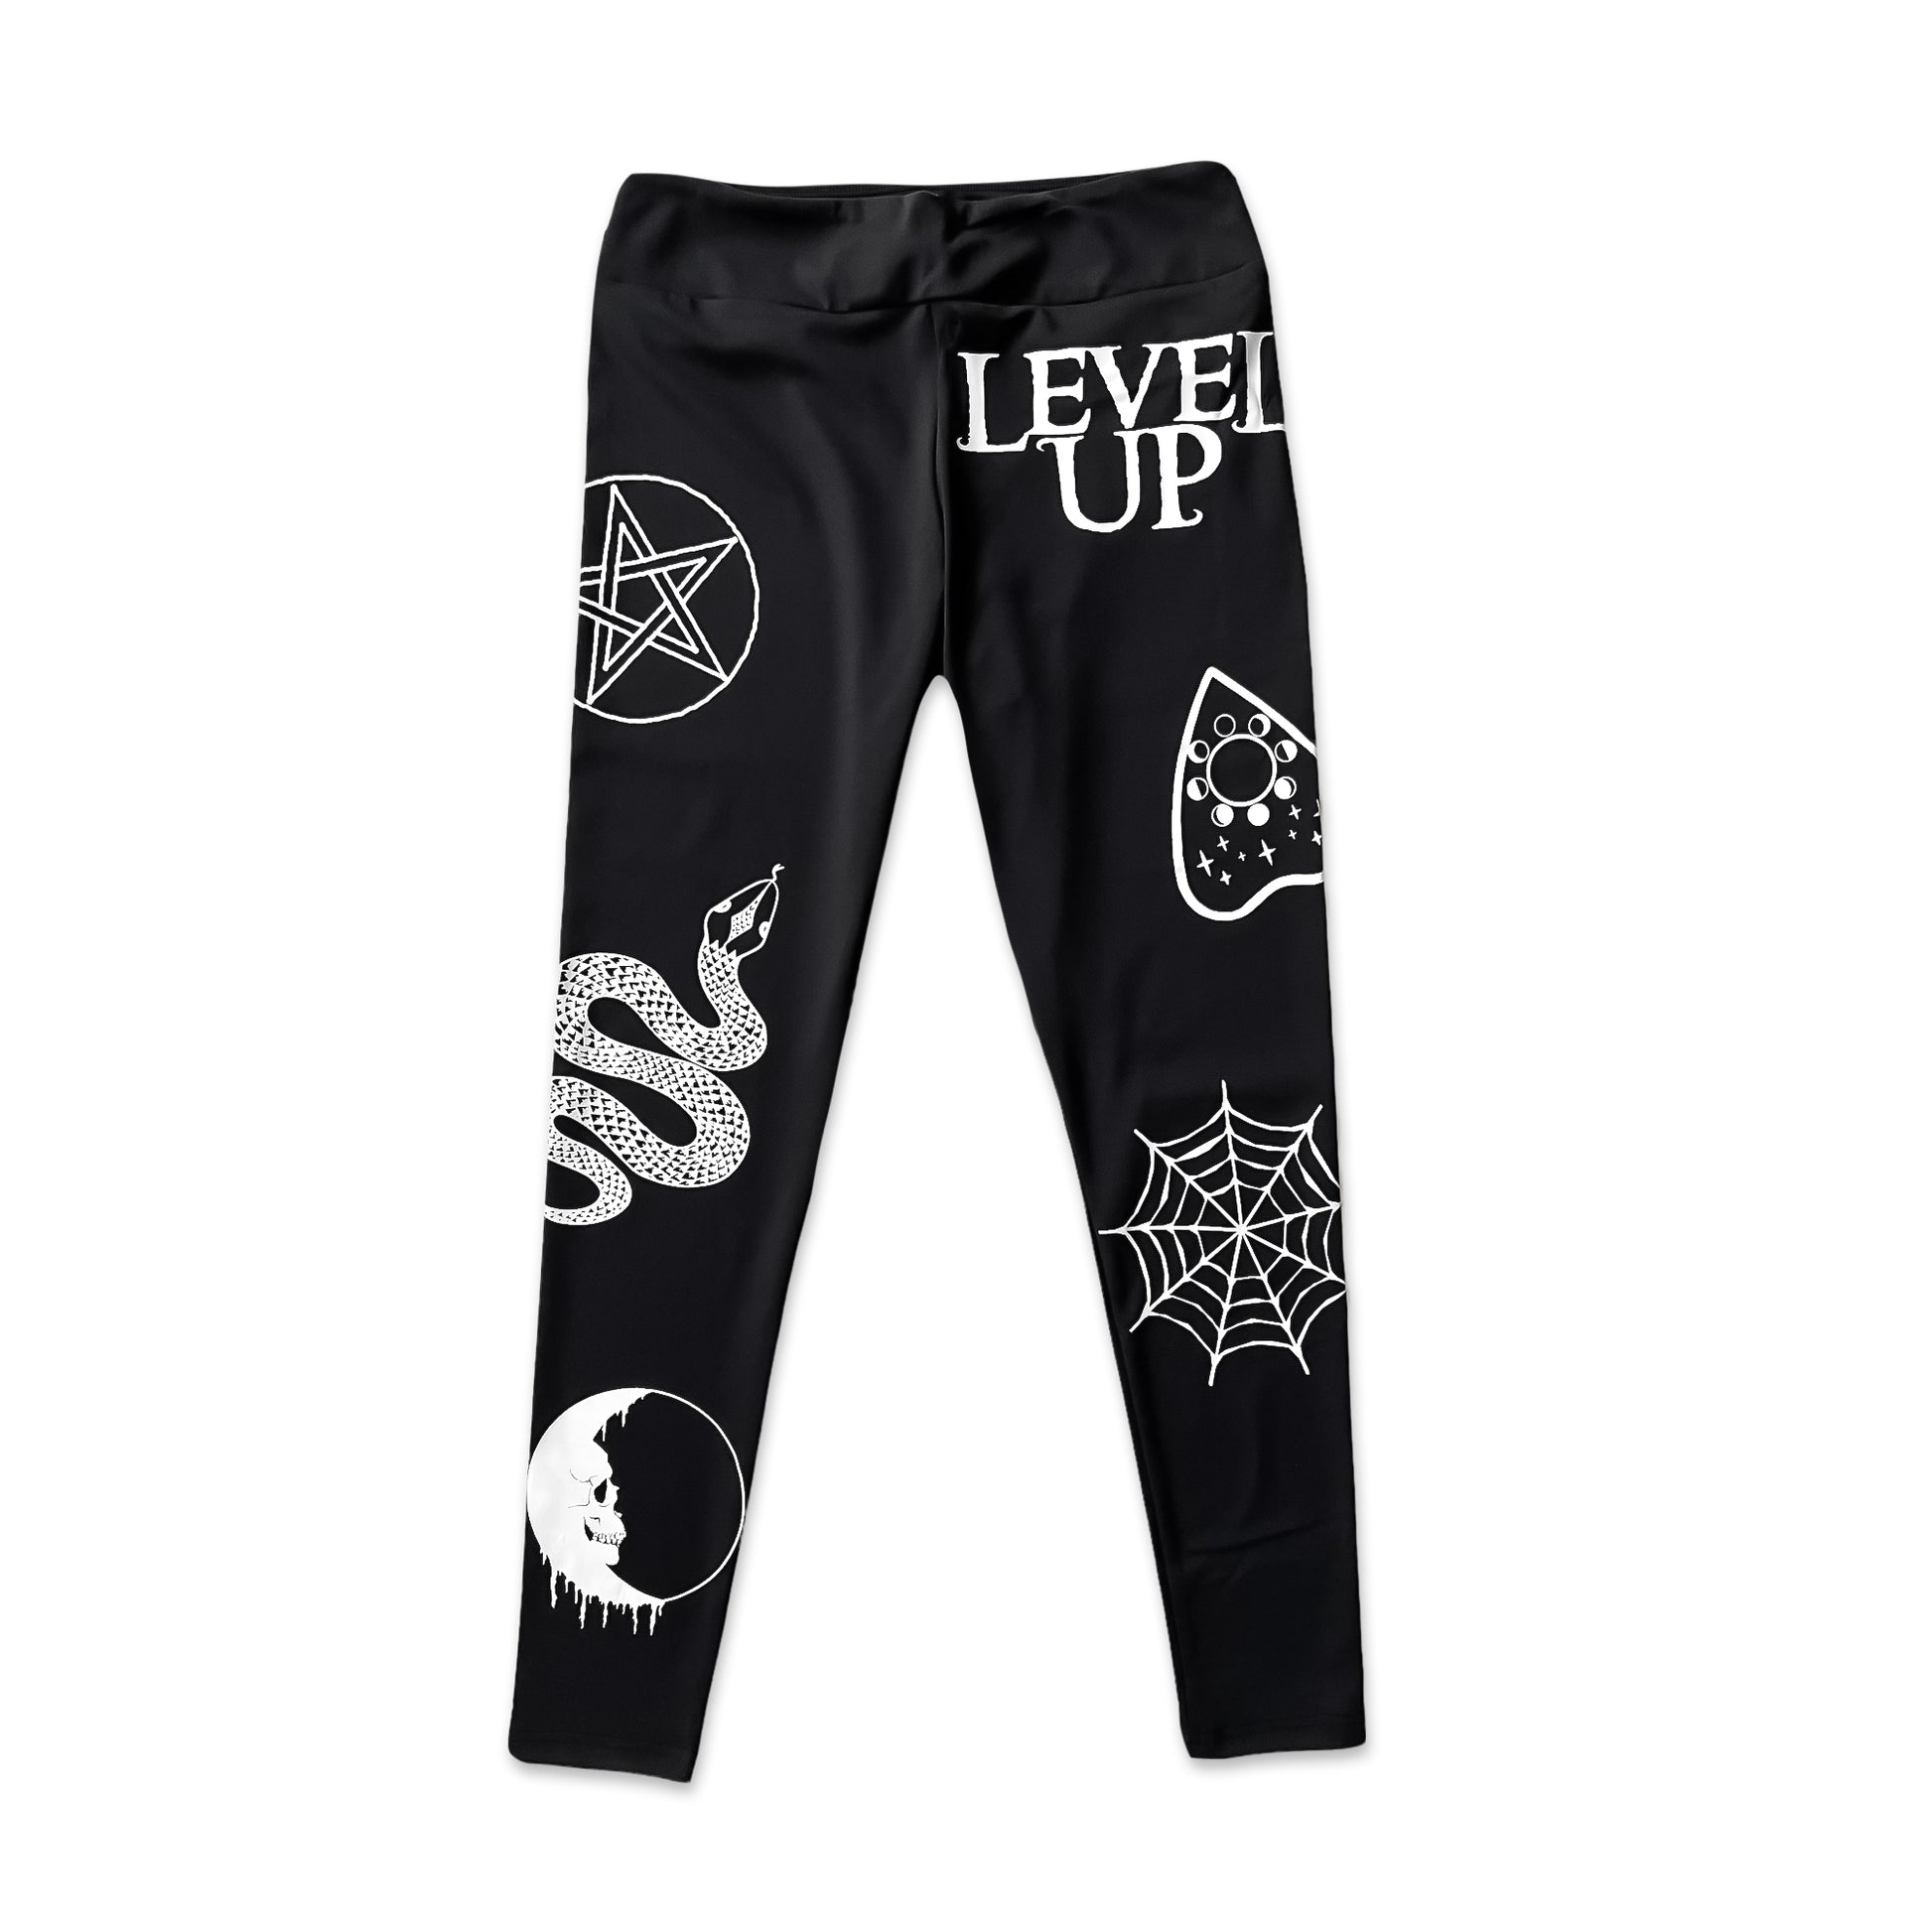 Leveling up leggings – Peach Tree Boutique